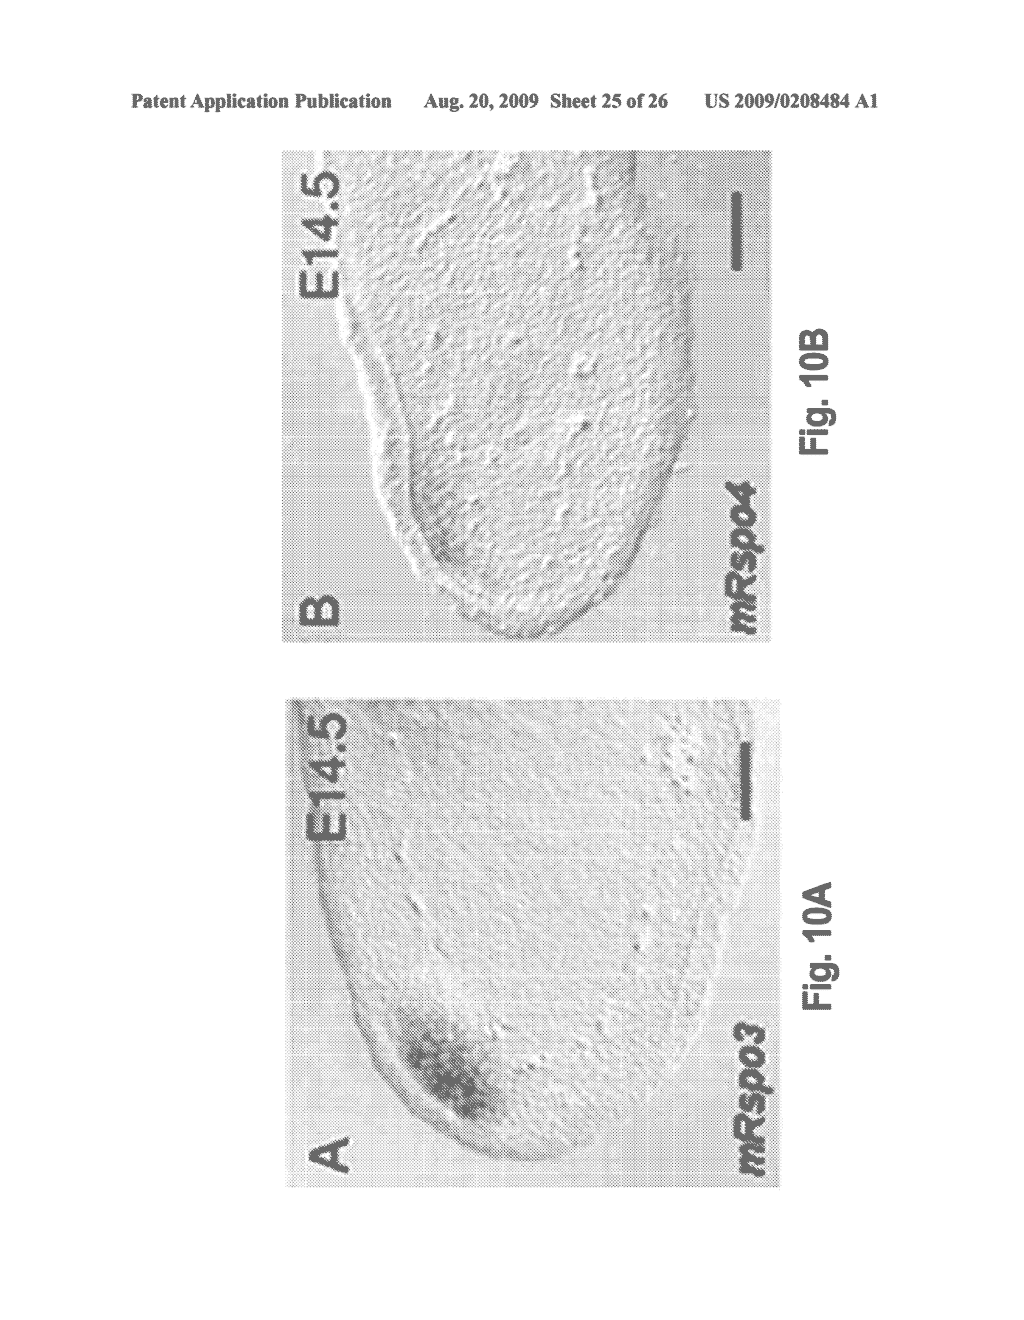 R-SPONDIN COMPOSITIONS AND METHODS OF USE THEREOF - diagram, schematic, and image 26